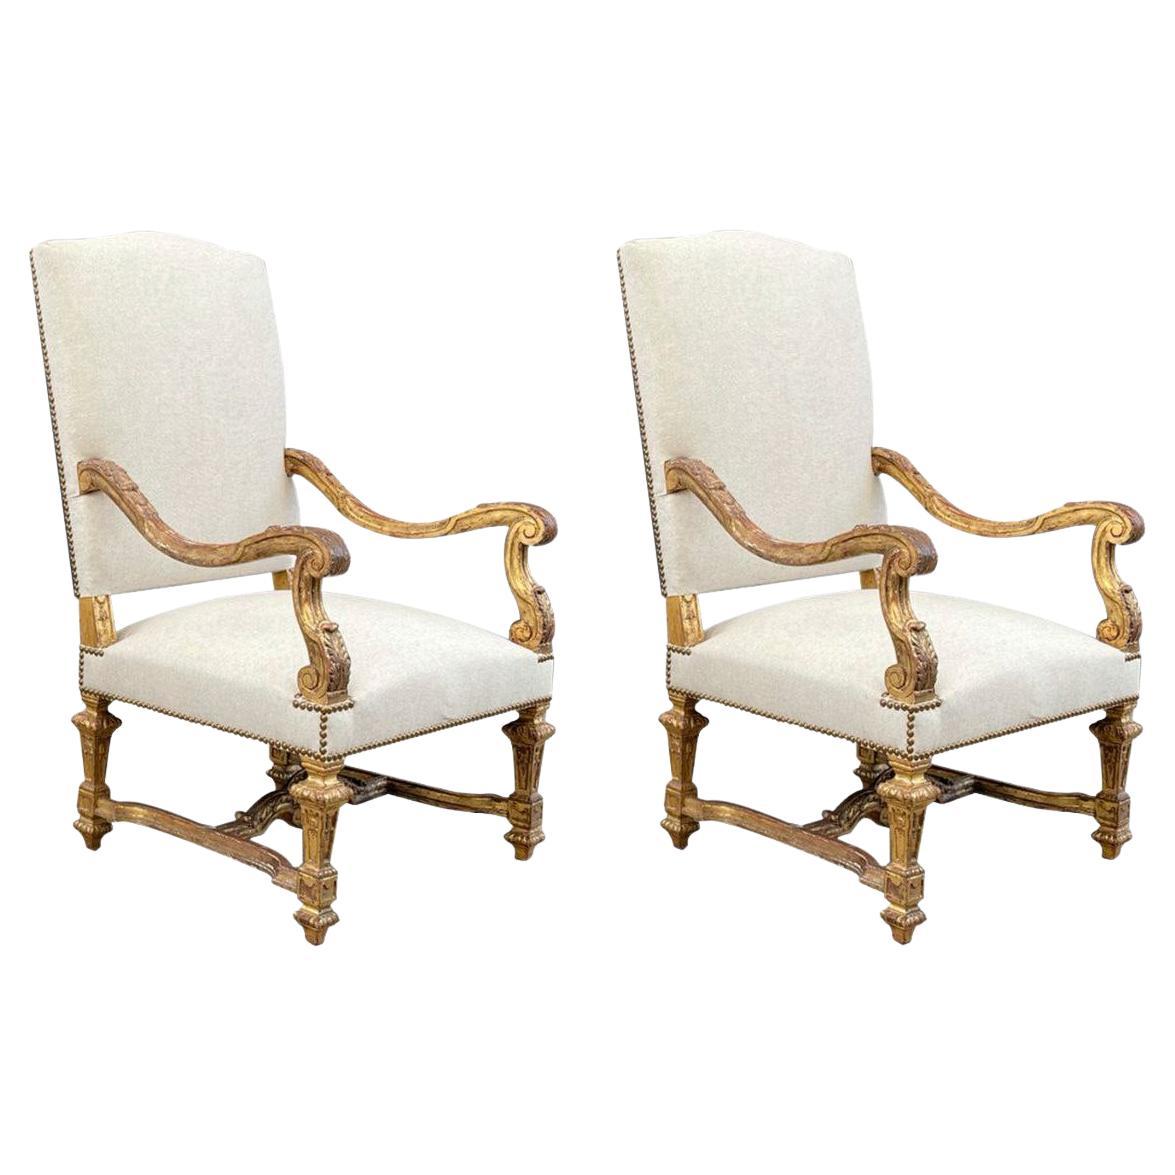 Pair of Italian Giltwood & Linen Arm Chairs